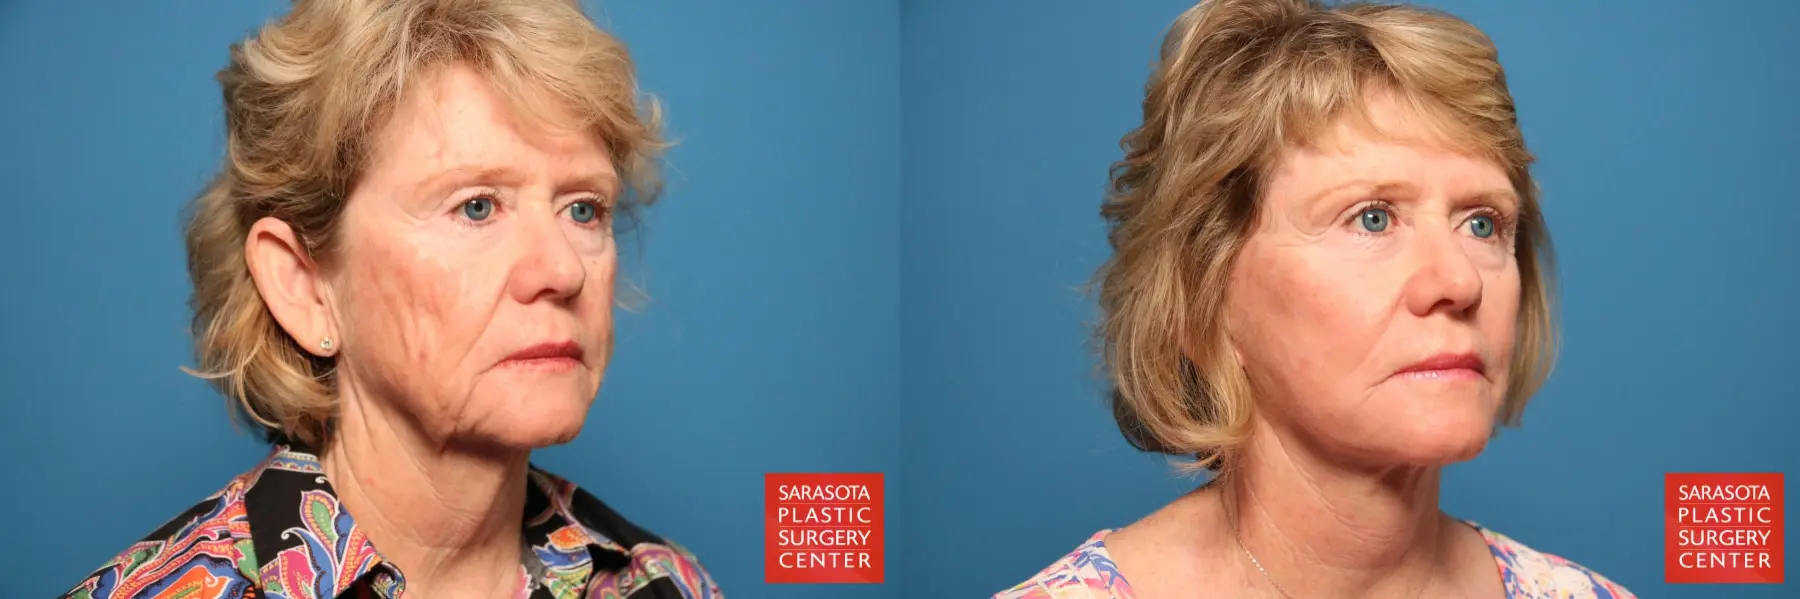 Facelift: Patient 8 - Before and After 4